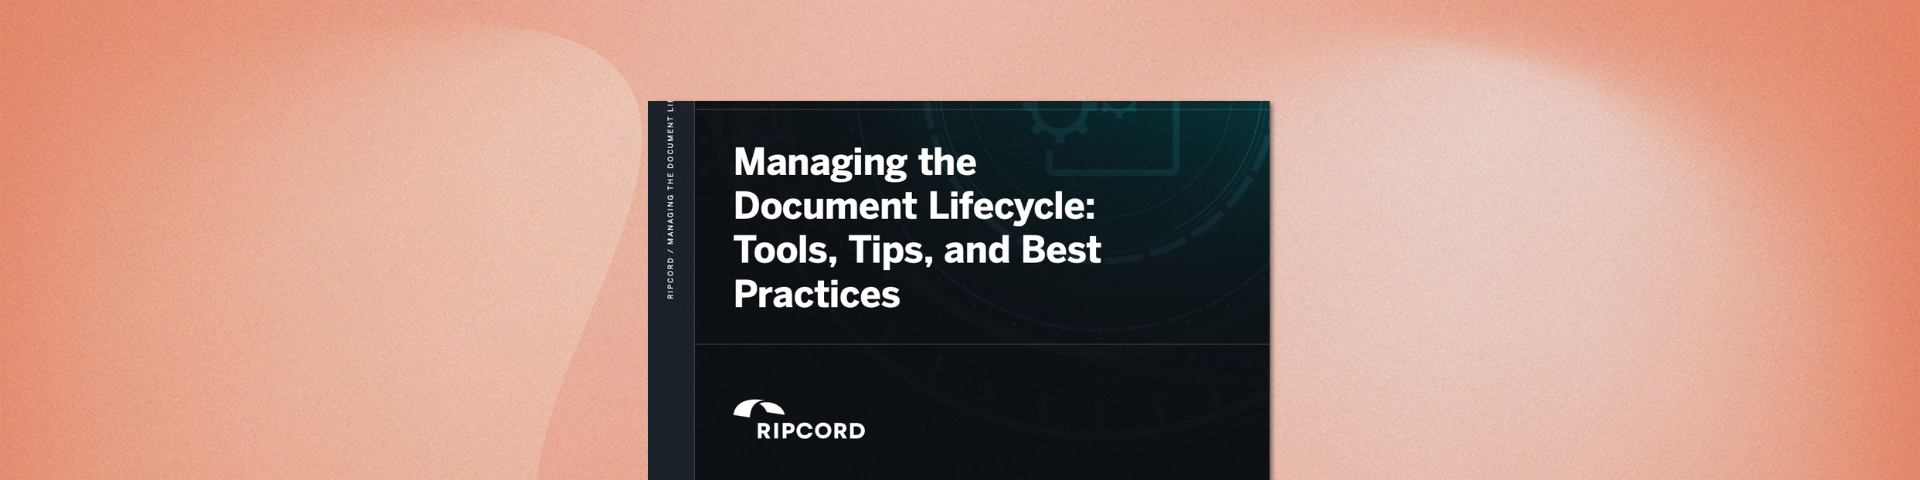 Managing the Document Lifecycle Tools, Tips, and Best Practices eBook - Ripcord